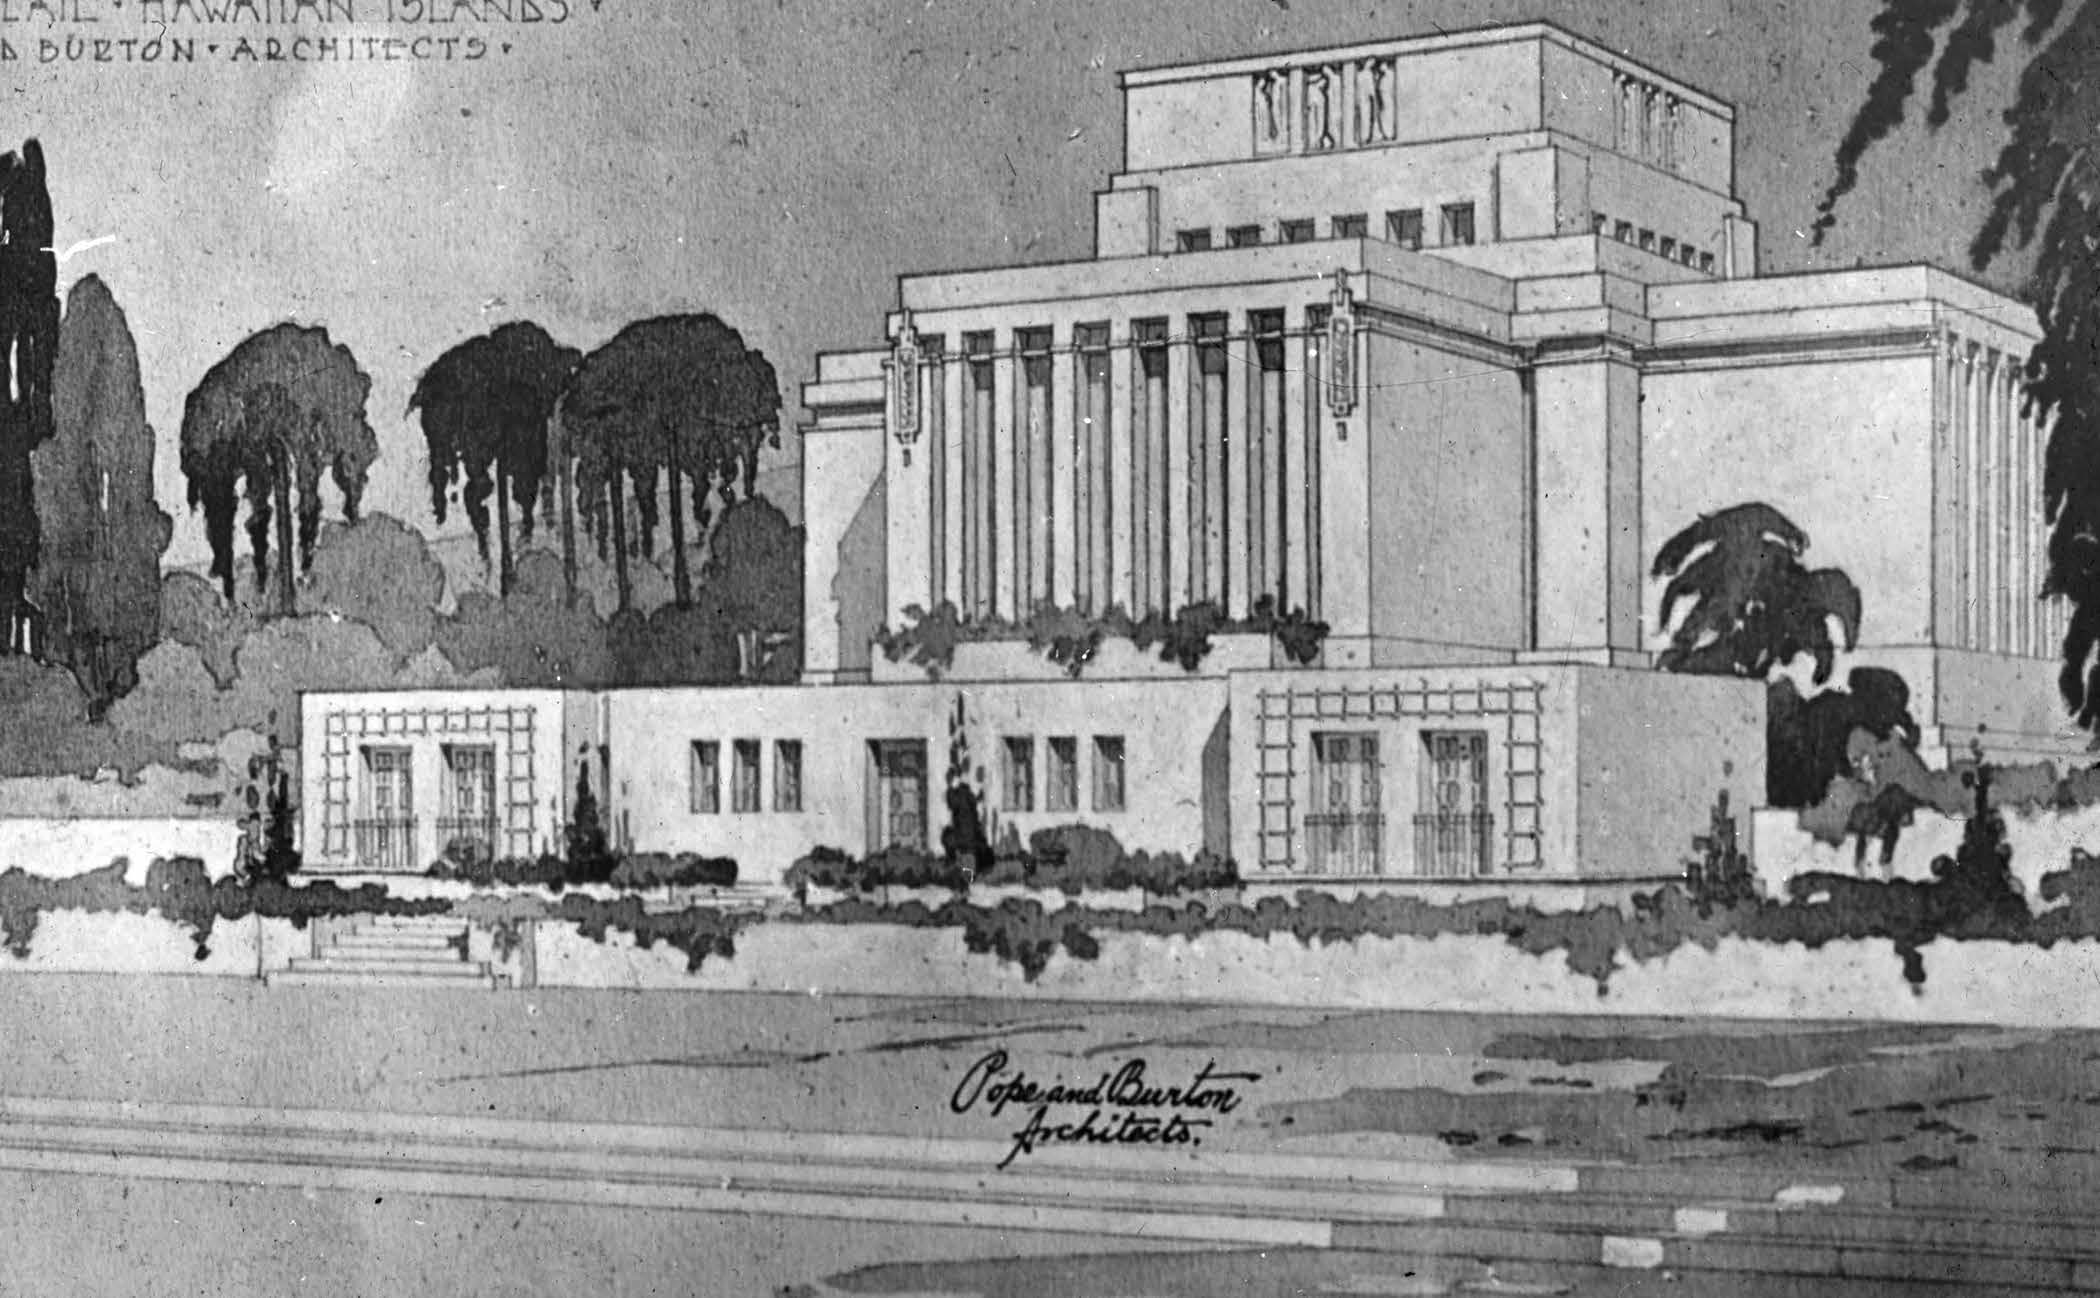 The Laie Hawaii Temple combined ancient and modern design, drawing from such structures as the ancient temple in Jerusalem, pre-Columbian ruins in America, and contemporary buildings such as Frank Lloyd Wright’s Unity Temple in Chicago, Illinois. Above: Sketch of Laie Hawaii Temple courtesy of Church History Library.